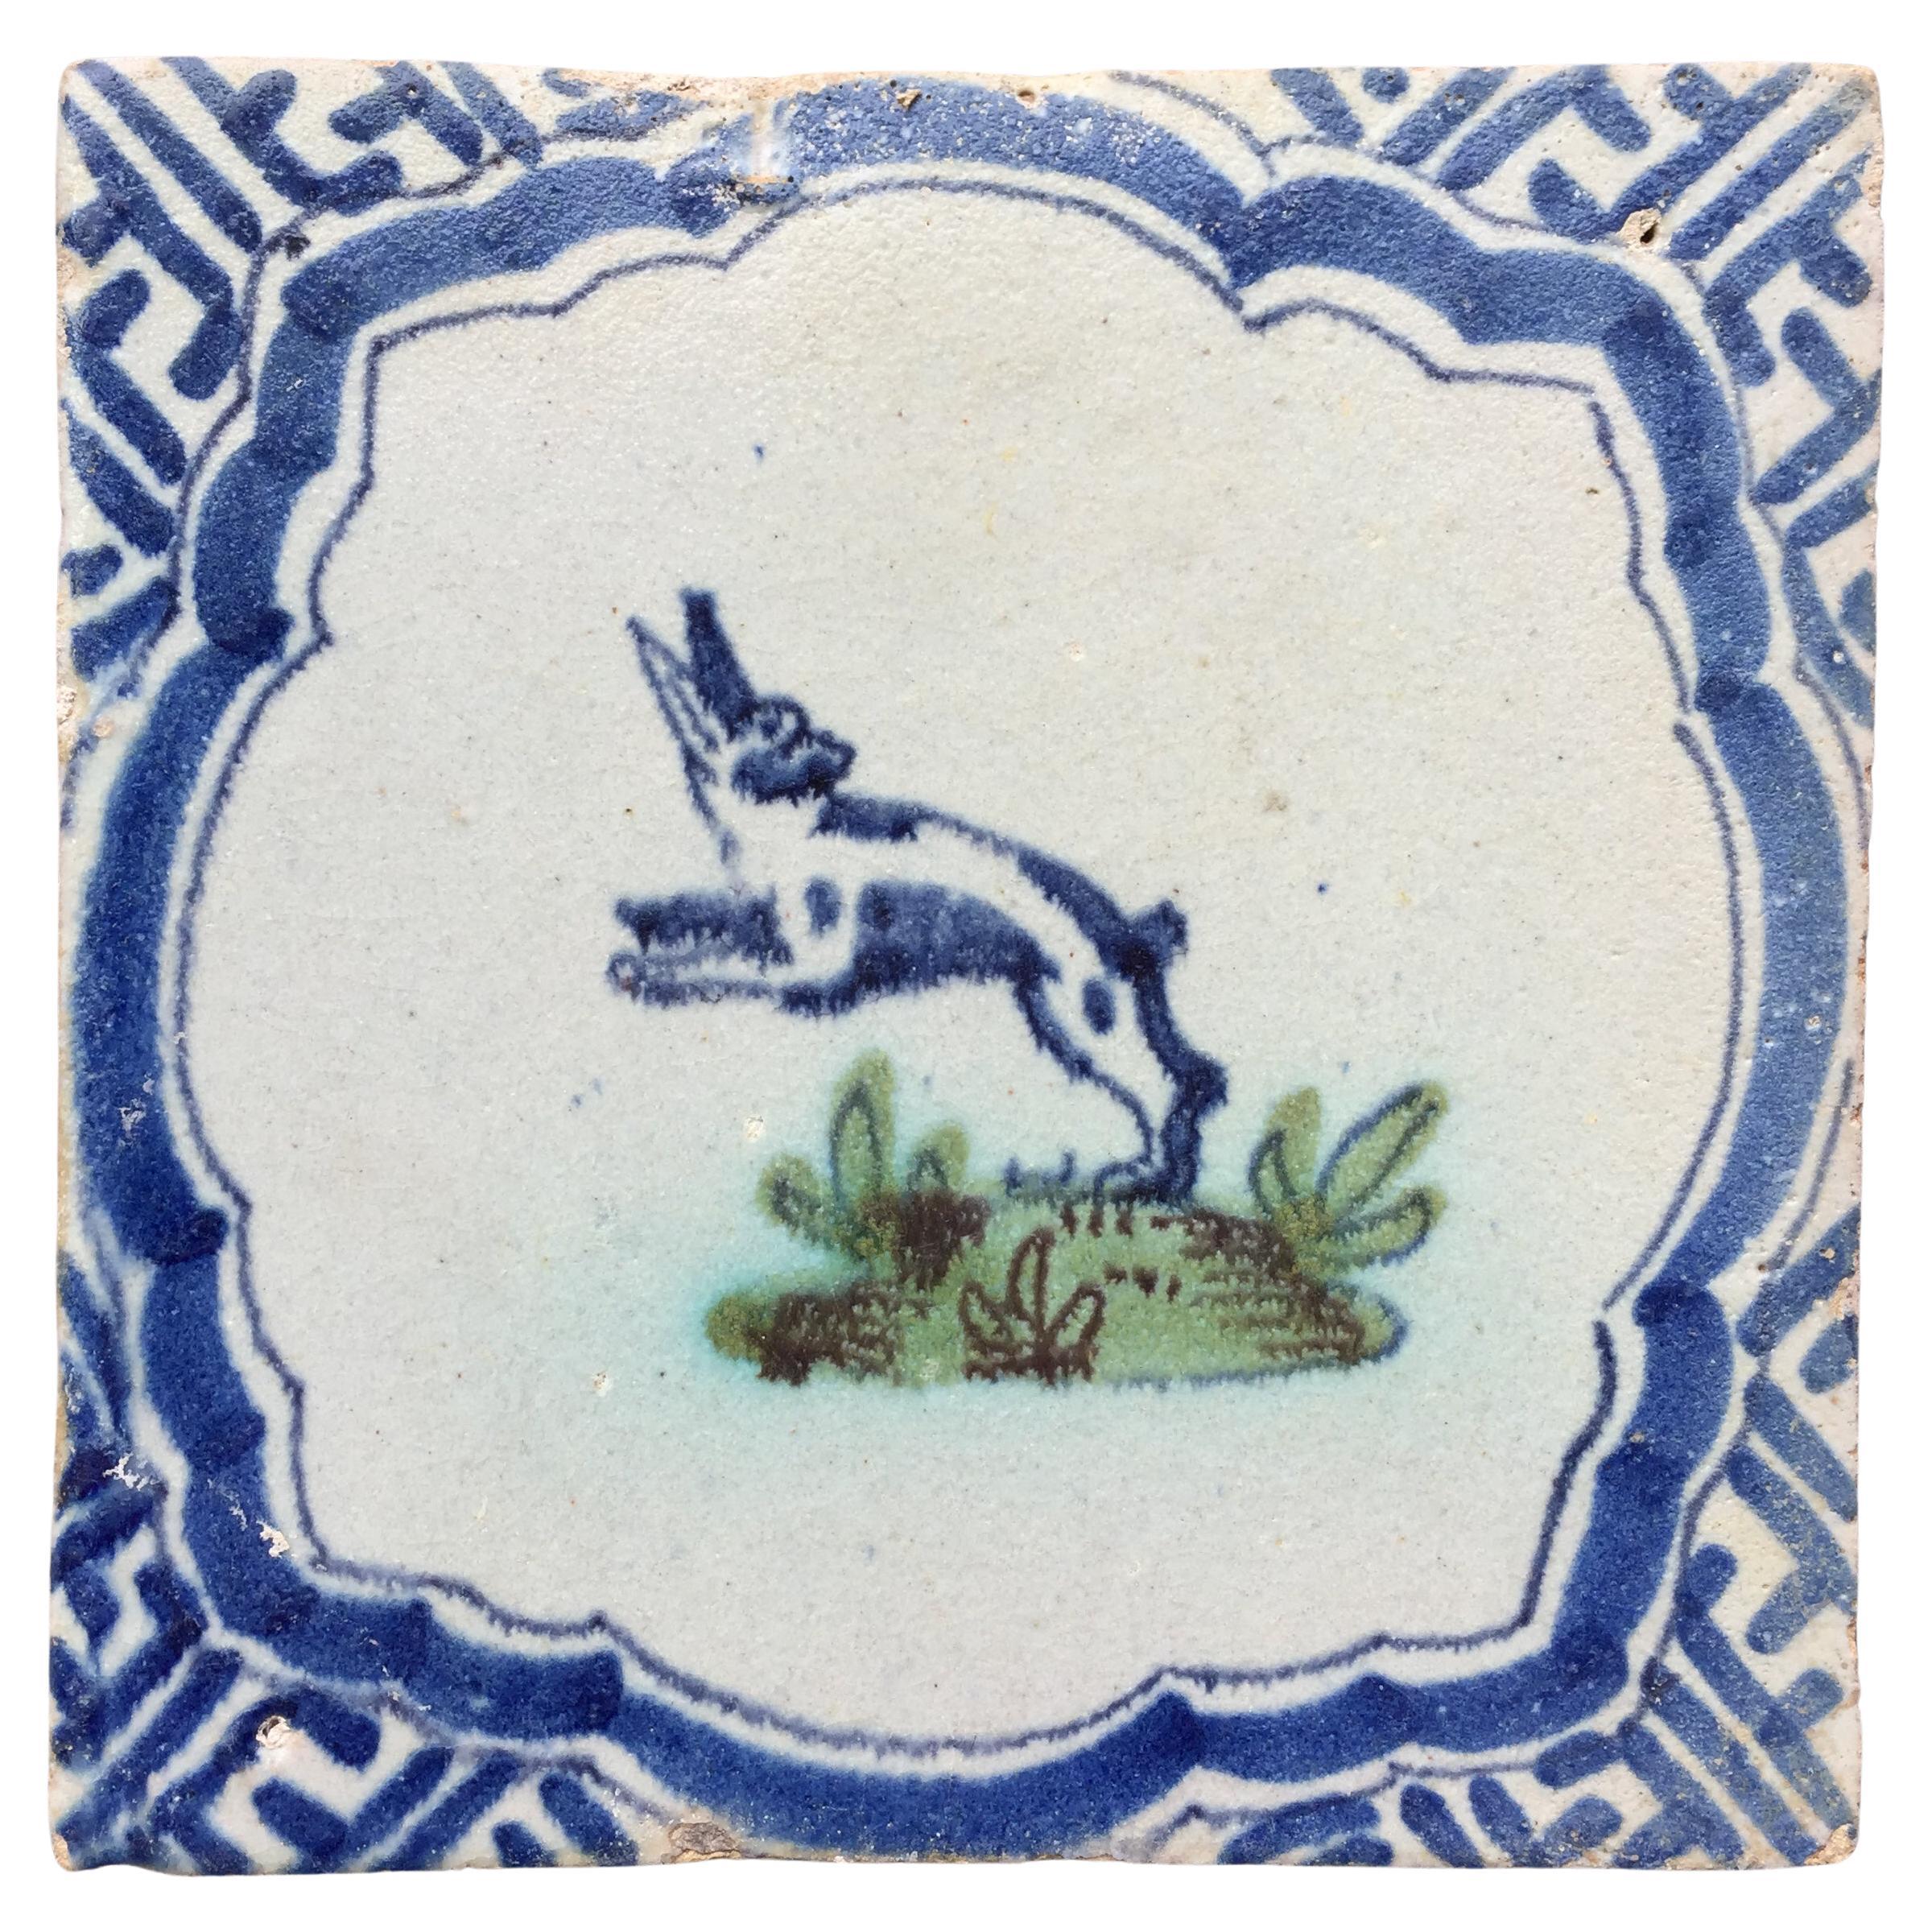 Blue and White Dutch Delft Tile with Hare, Mid 17th Century